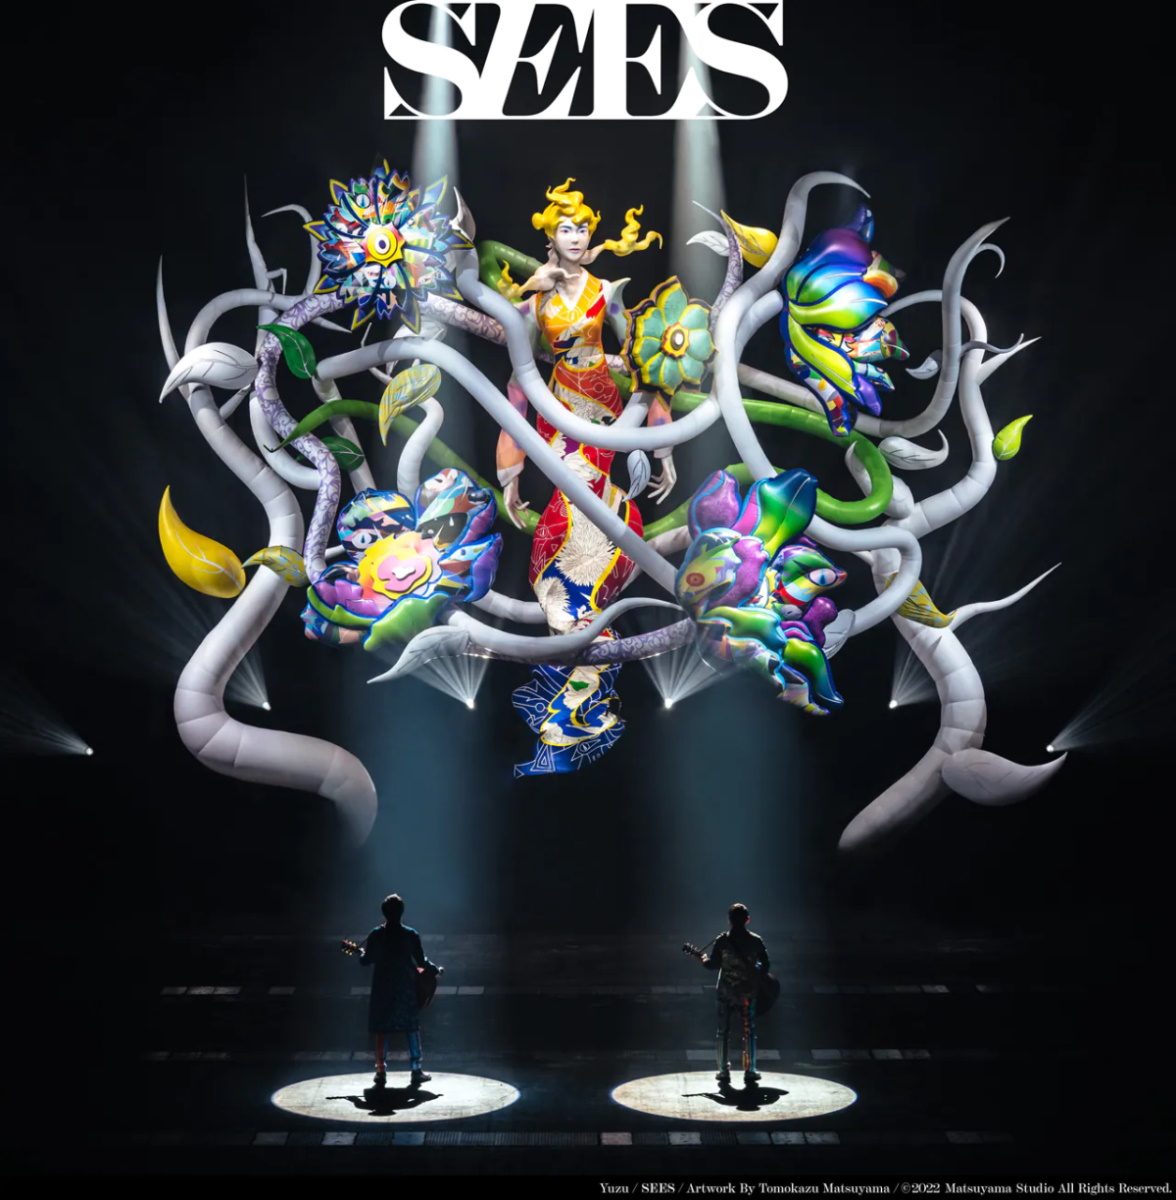 Cover for『YUZU - Mukidashi』from the release『SEES』